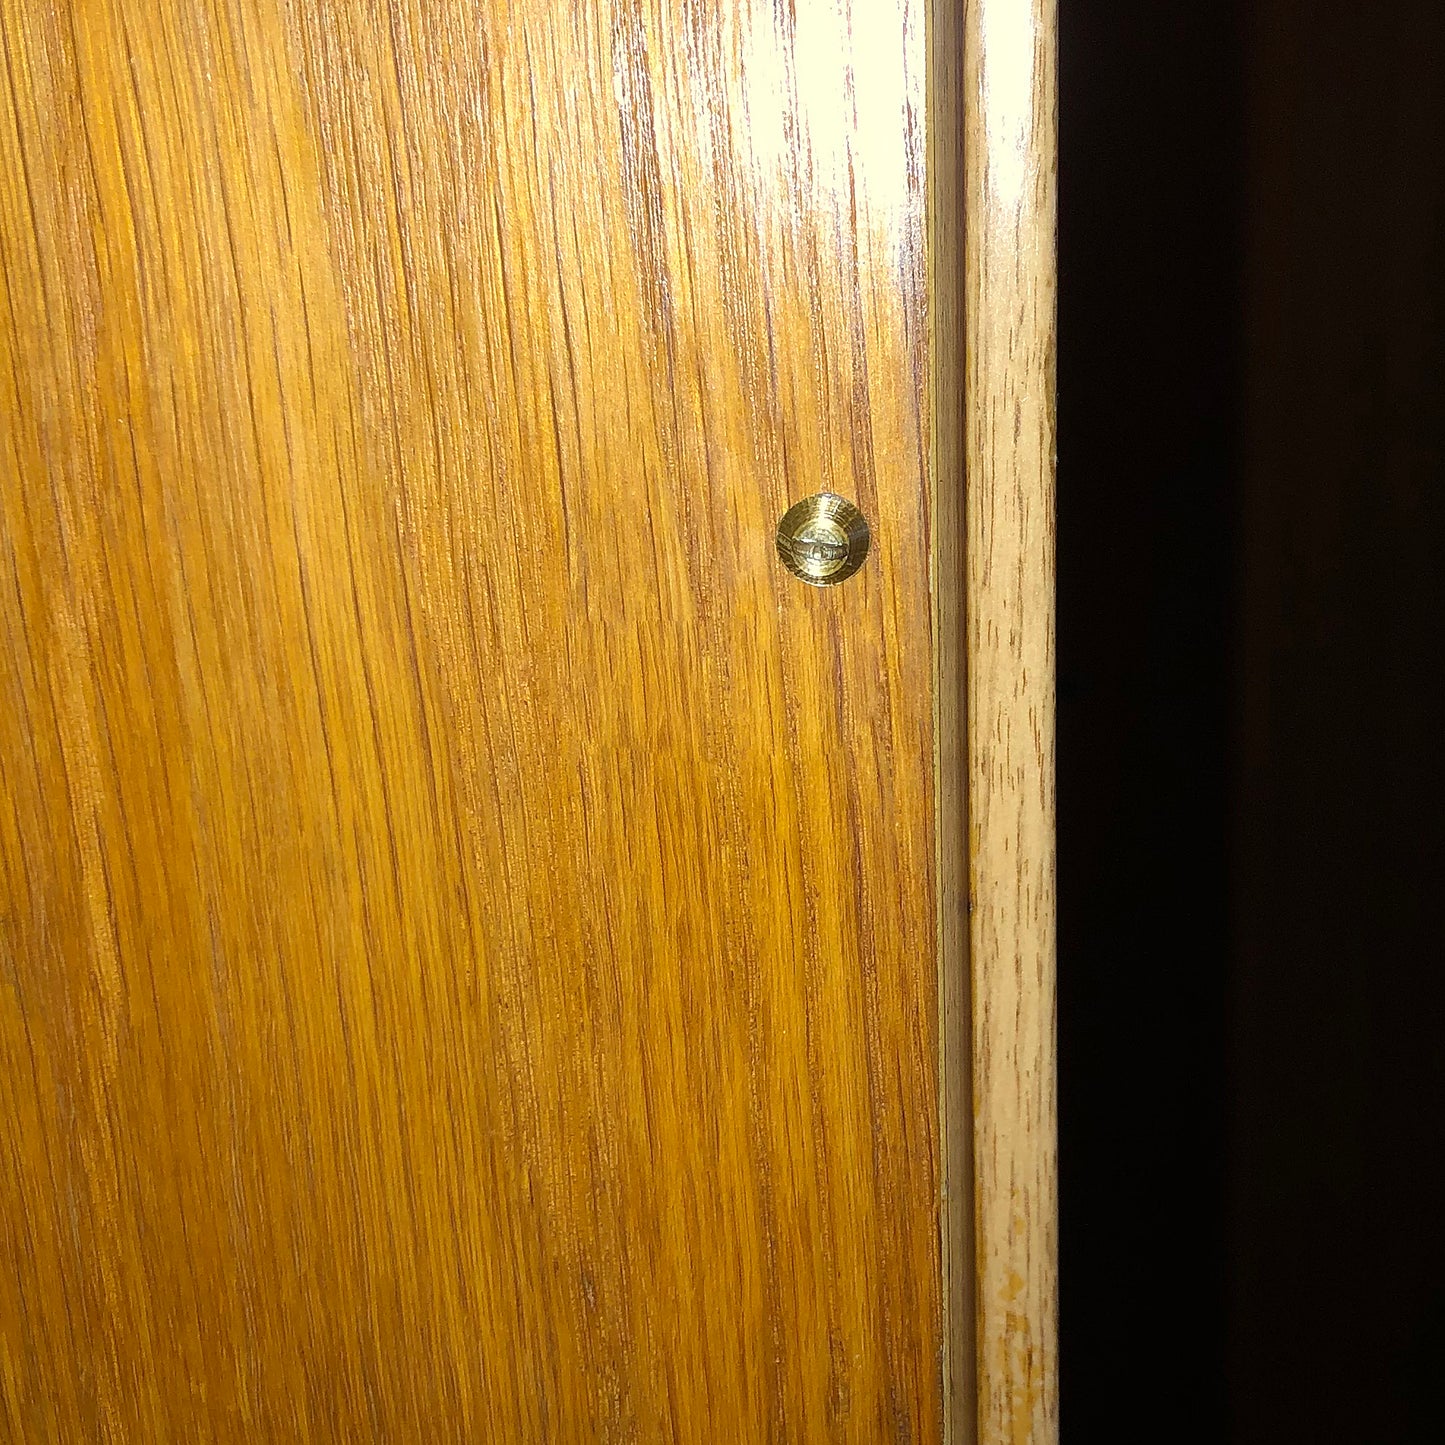 Exterior door key holder and opening knob for a hjome in a block of flats